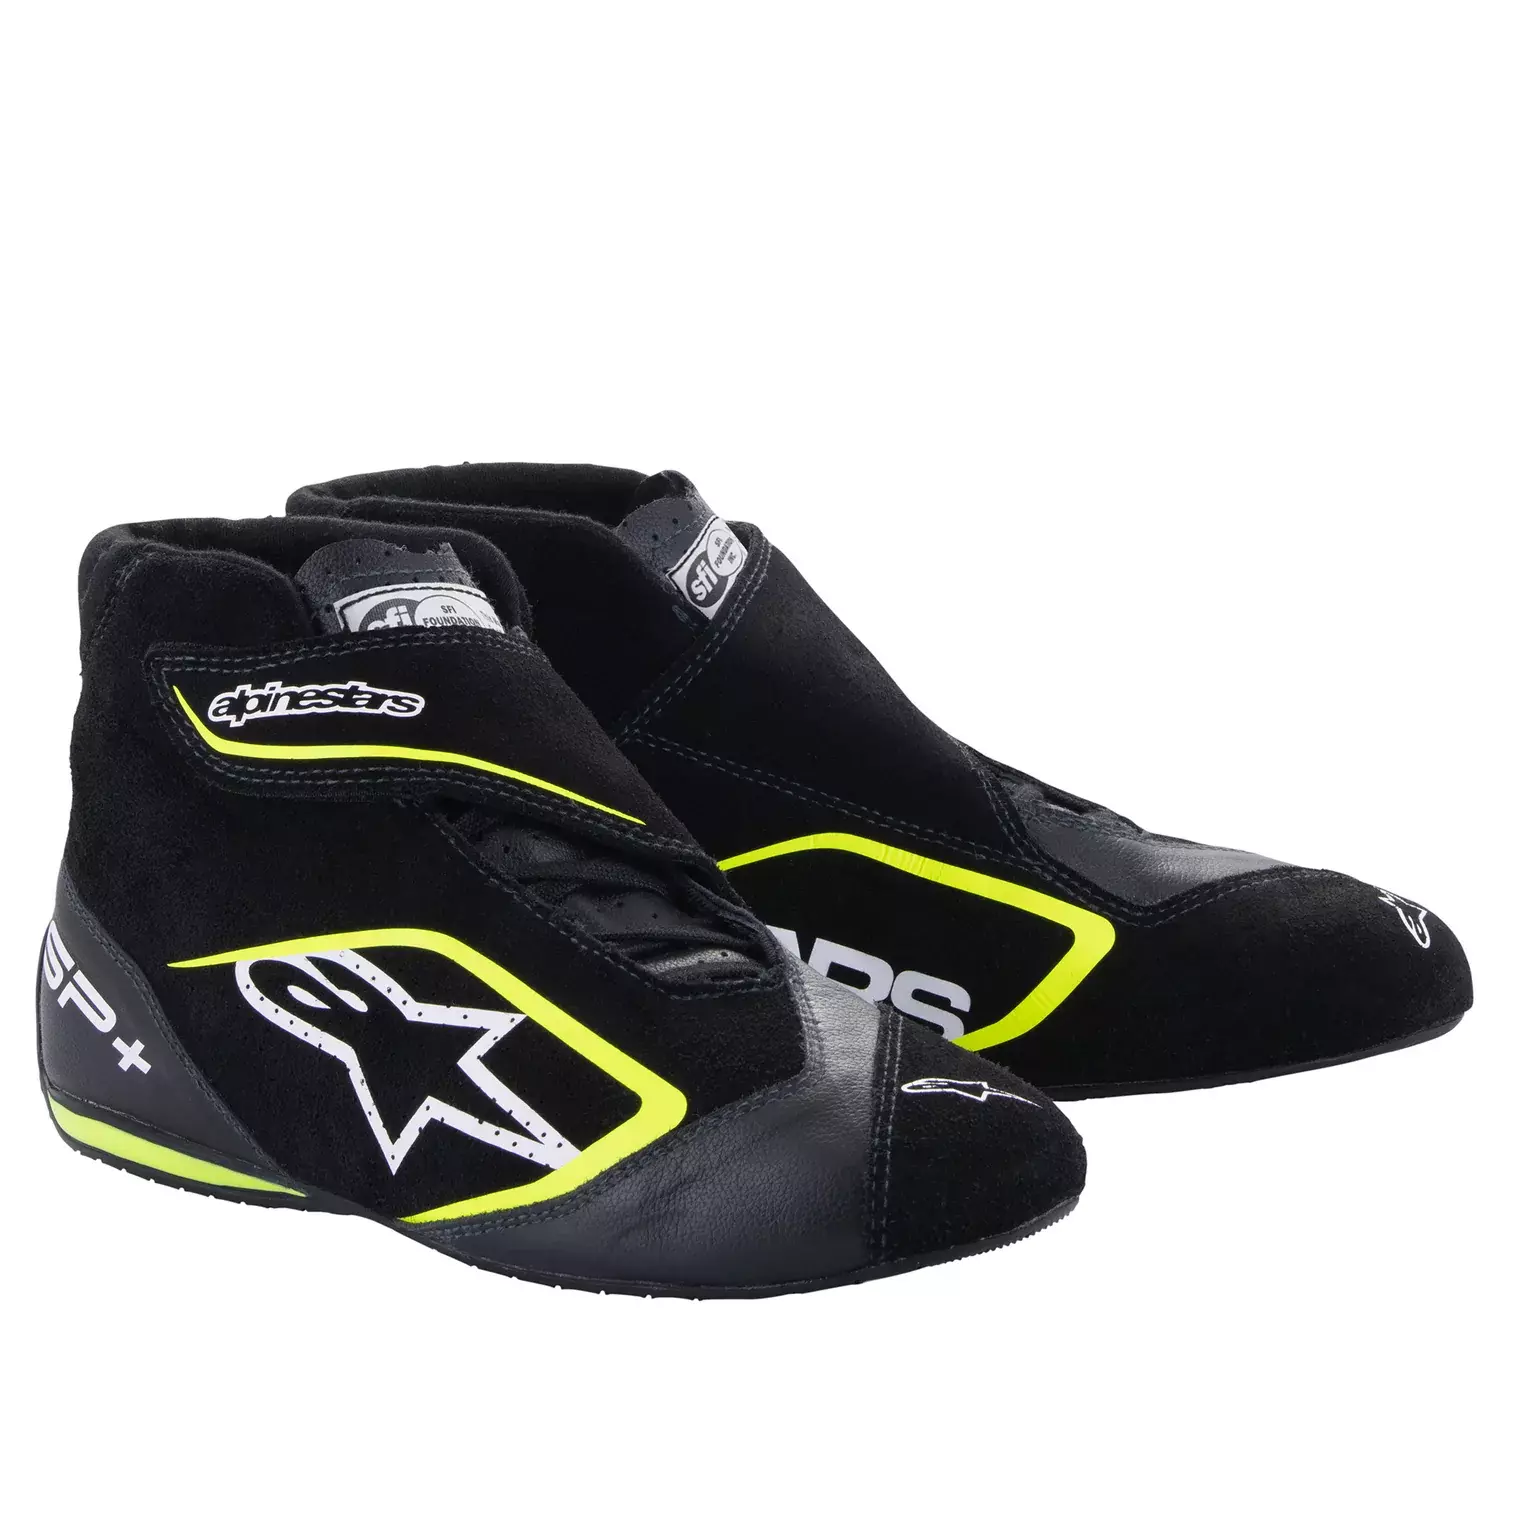 Alpinestars 2710823-155-13 Driving Shoe, SP+, Mid-Top, SFI 3.3, FIA Approved, Suede Outer, Nomex Inner, Black / Fluorescent Yellow, Size 13, Pair